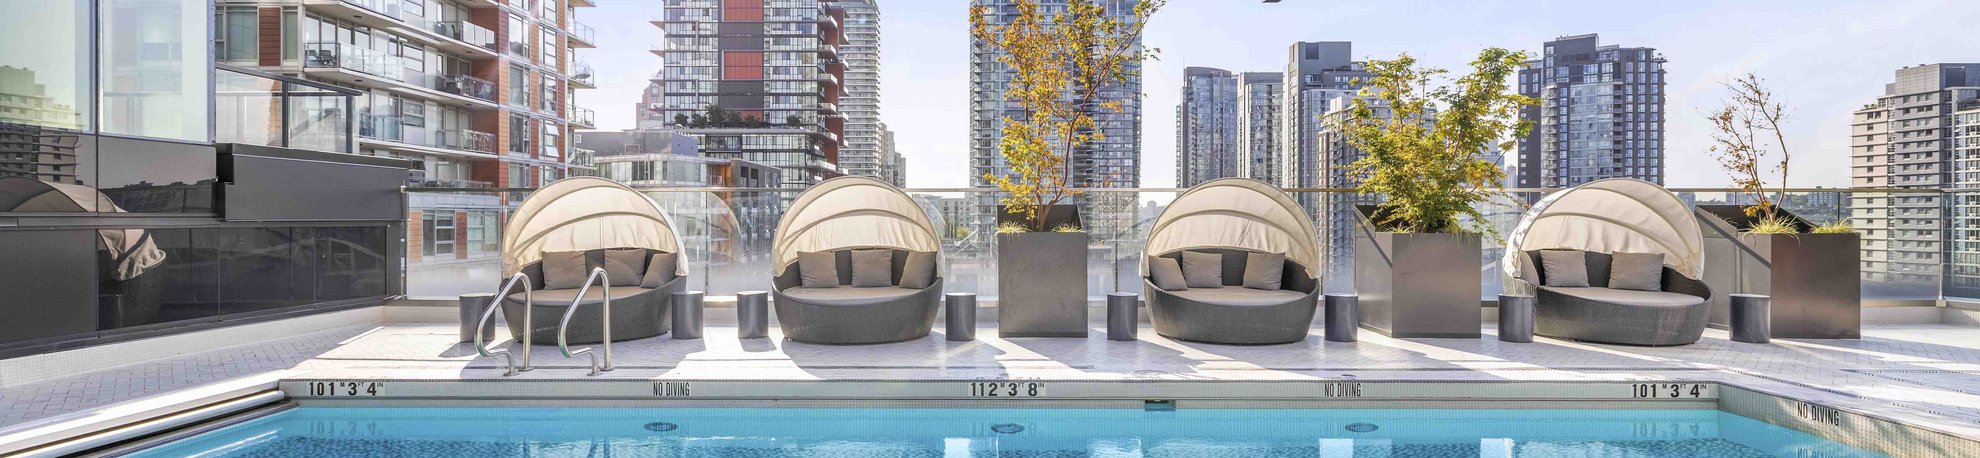 vancouver_level_howe_outdoor_pool